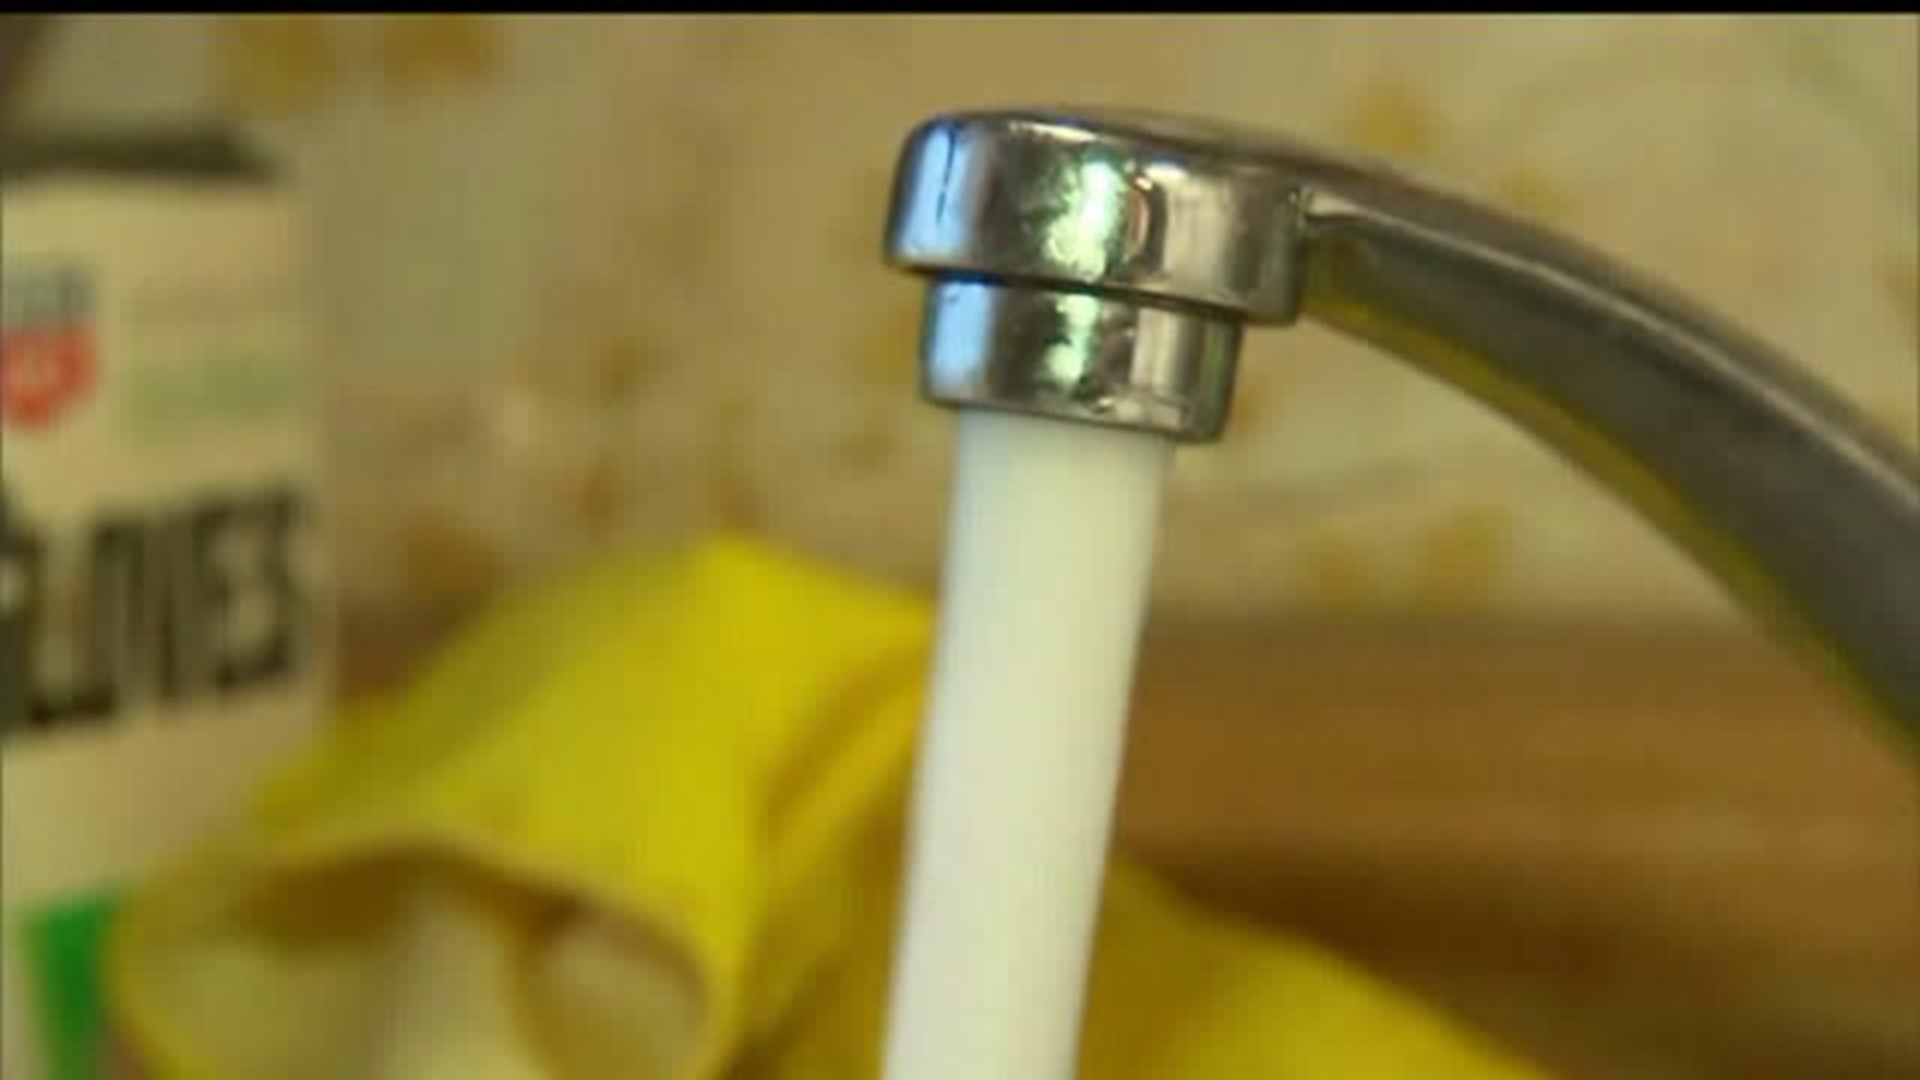 Water levels link to cancer in Steelton